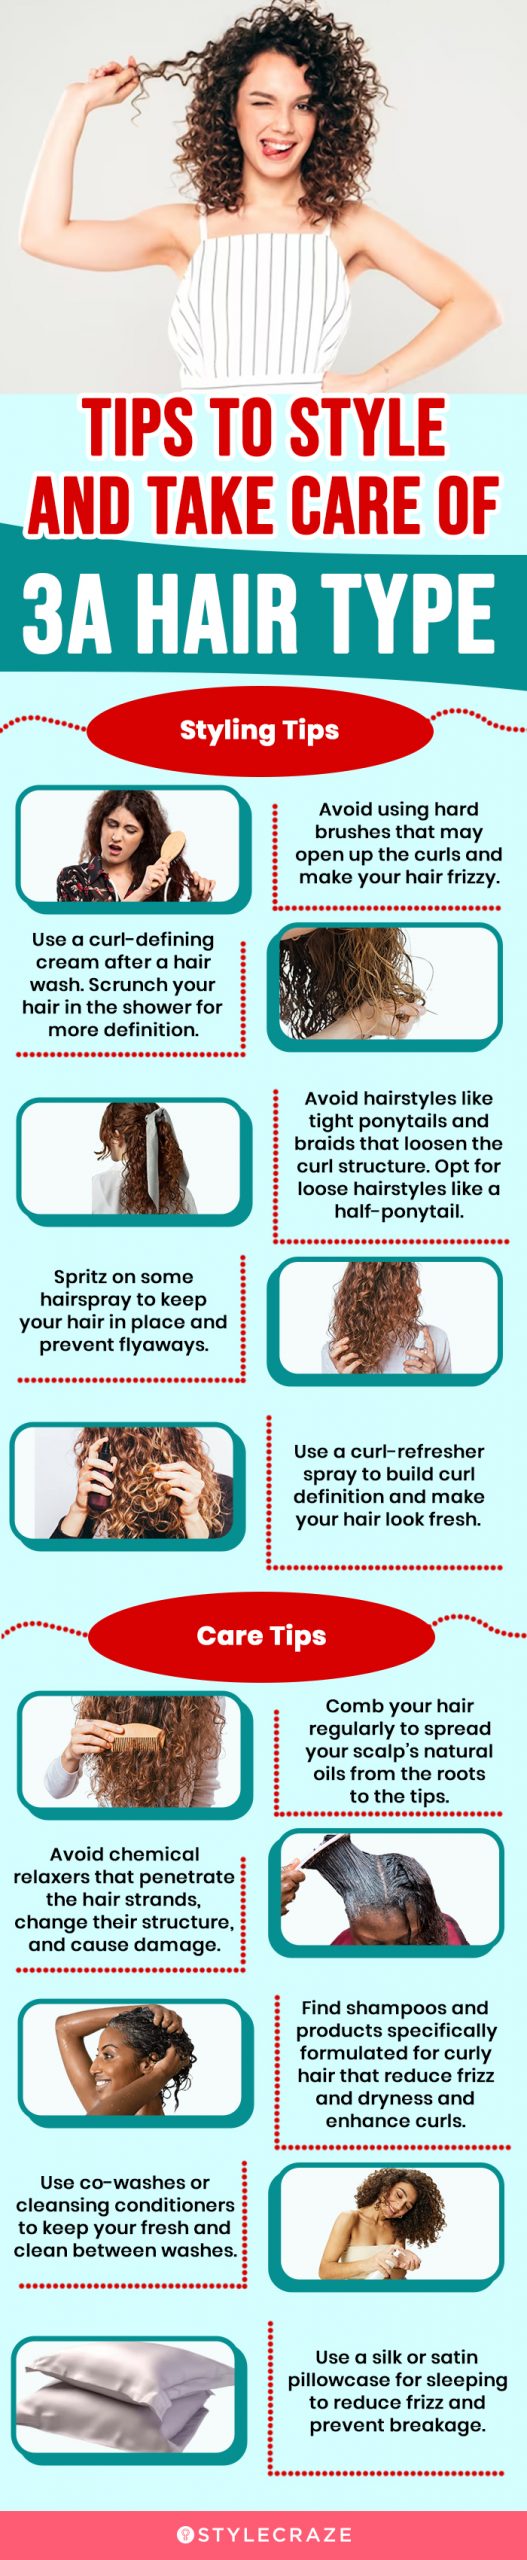 tips to style and take care of 3a hair type (infographic)